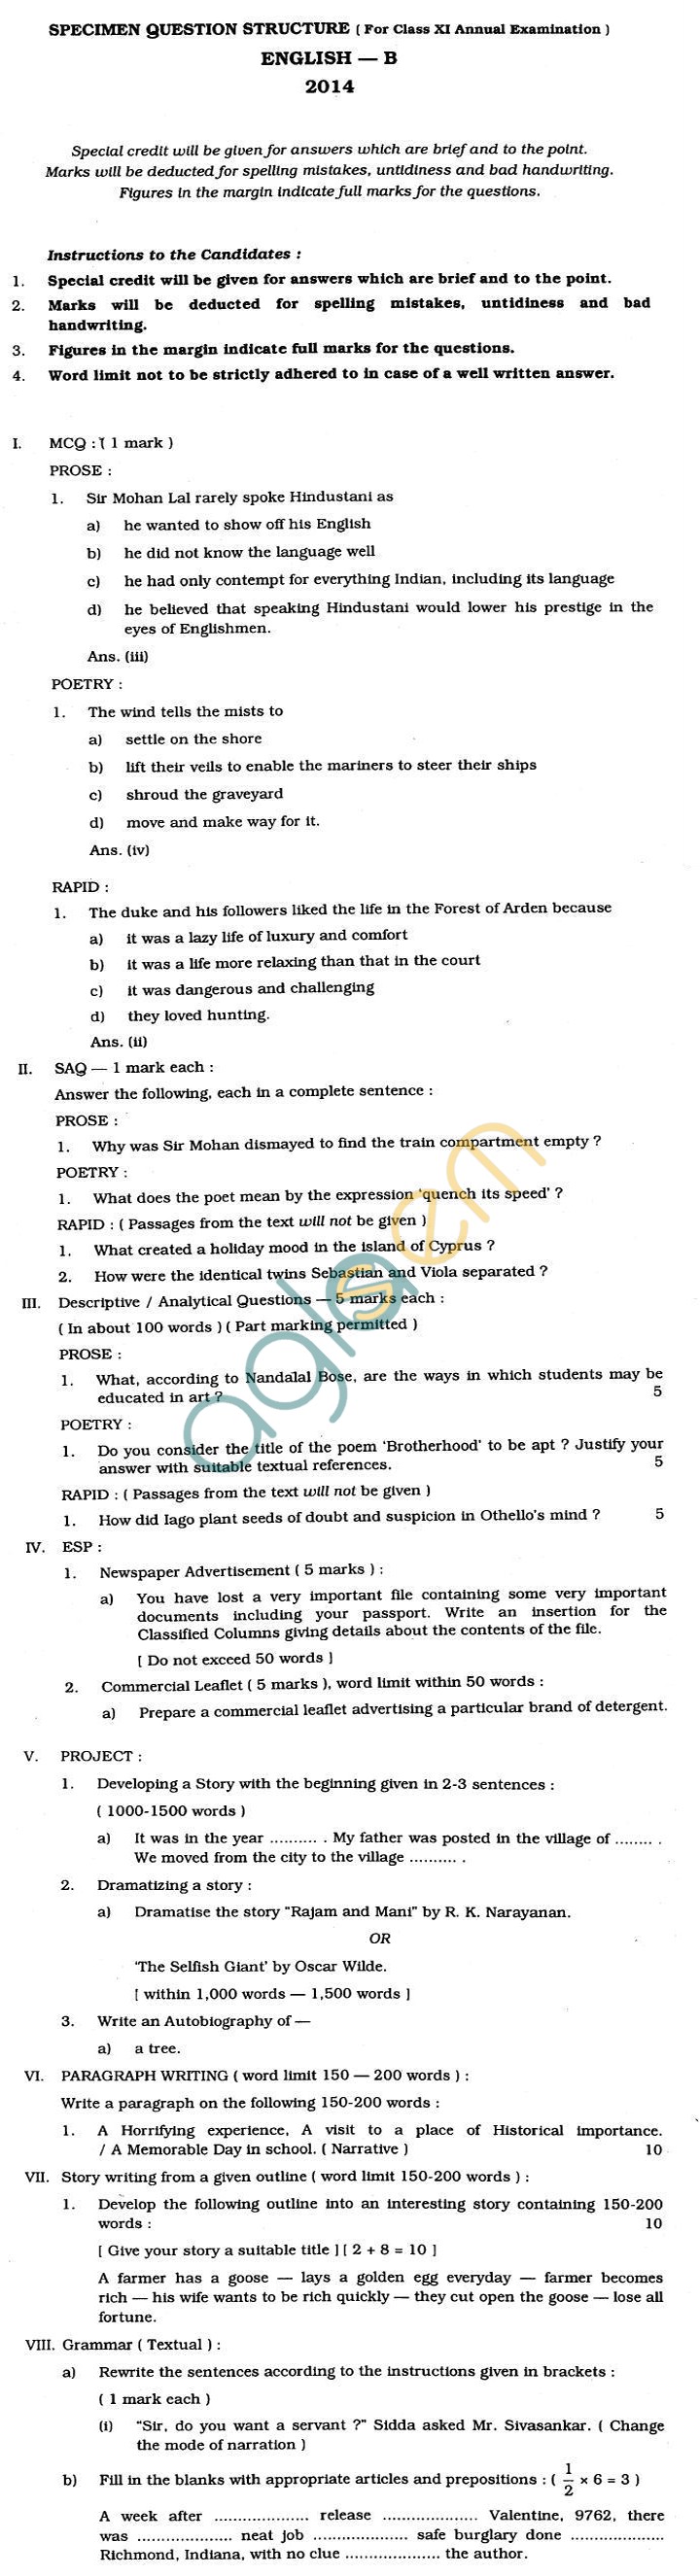 West Bengal Board Sample Question Paper for Class 11 - English (B)/